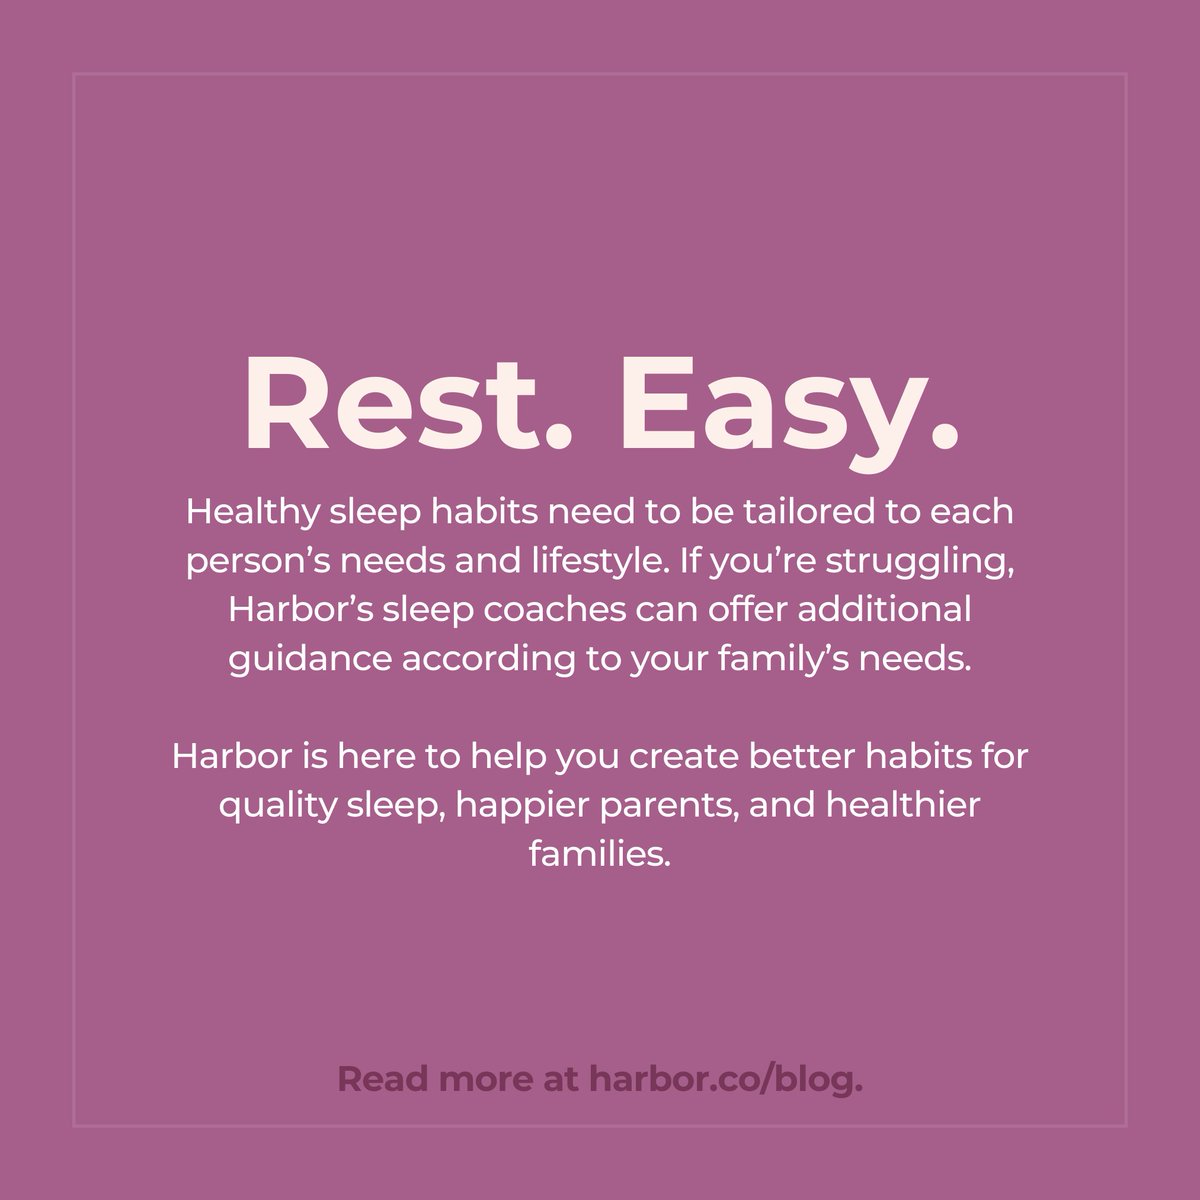 Parents deserve good sleep, too. Check out these quick tips from @harborsleep to maximize restful nights, so you can show up better for yourself and your family.

Get the full details here: harbor.co/blogs/blog/7-t…

#MorrisonSeger #Harbor #VentureCapital #RestEasy